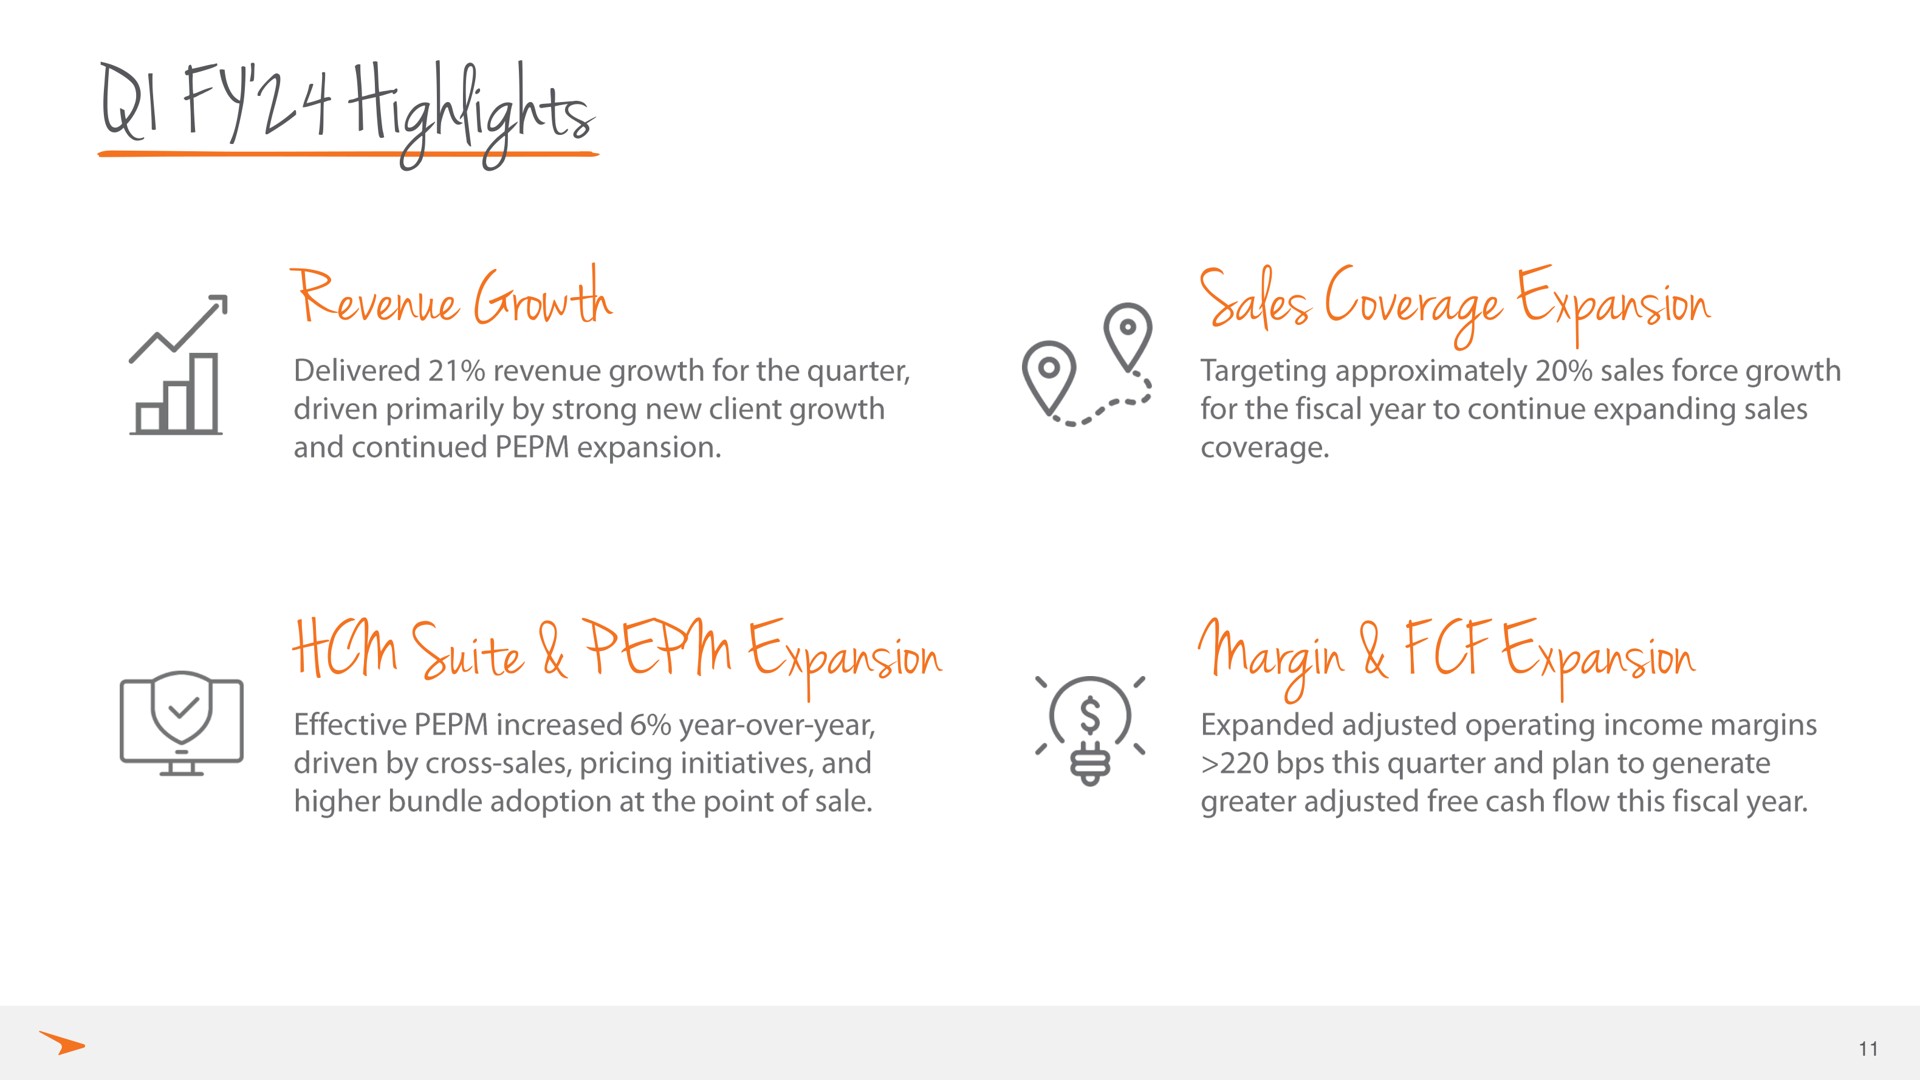 highlights revenue growth sales coverage expansion suite expansion margin expansion wee | Paycor